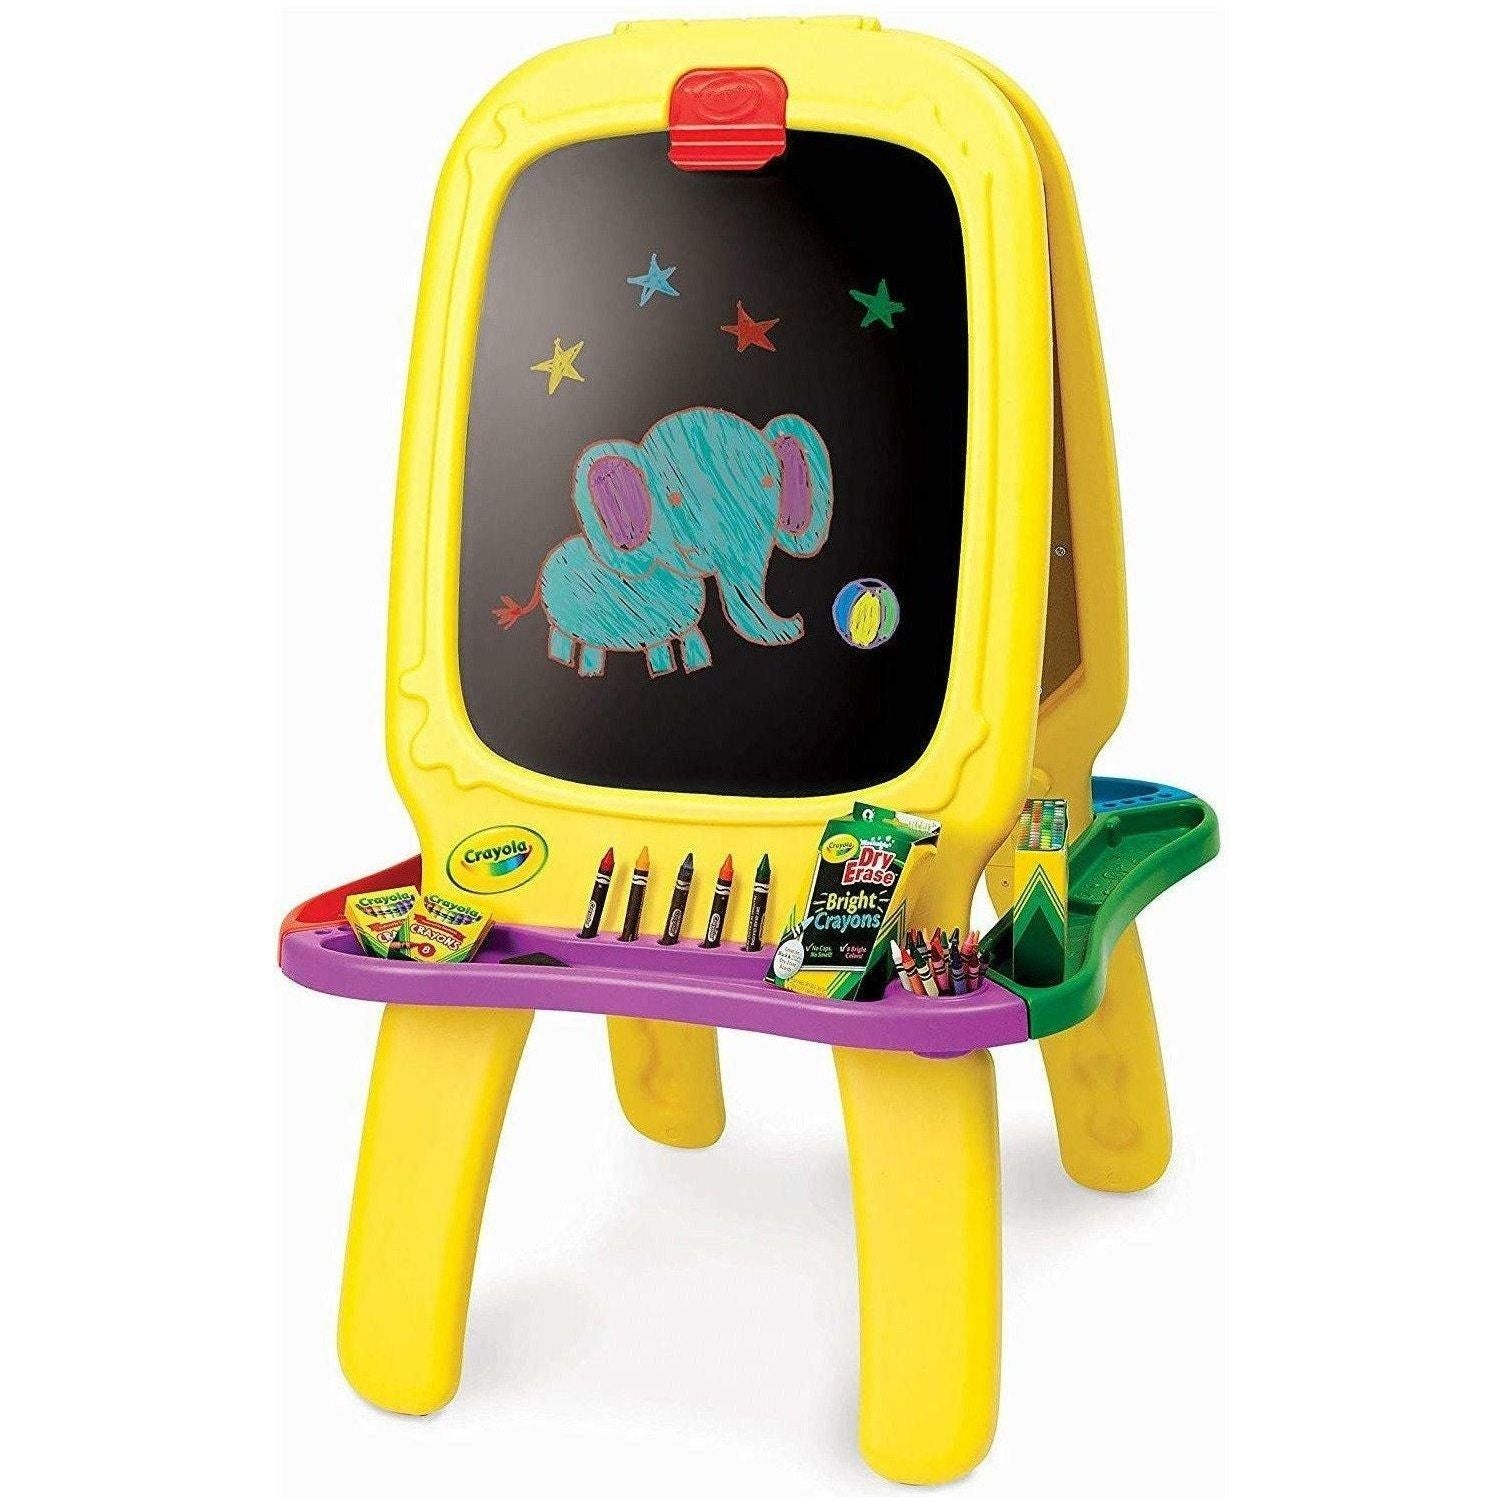 Crayola Deluxe Magnetic Double Whita And Black Board - BumbleToys - 2-4 Years, Blackboards & Easels, Boys, Crayola, Desk, Eagle Plus, Girls